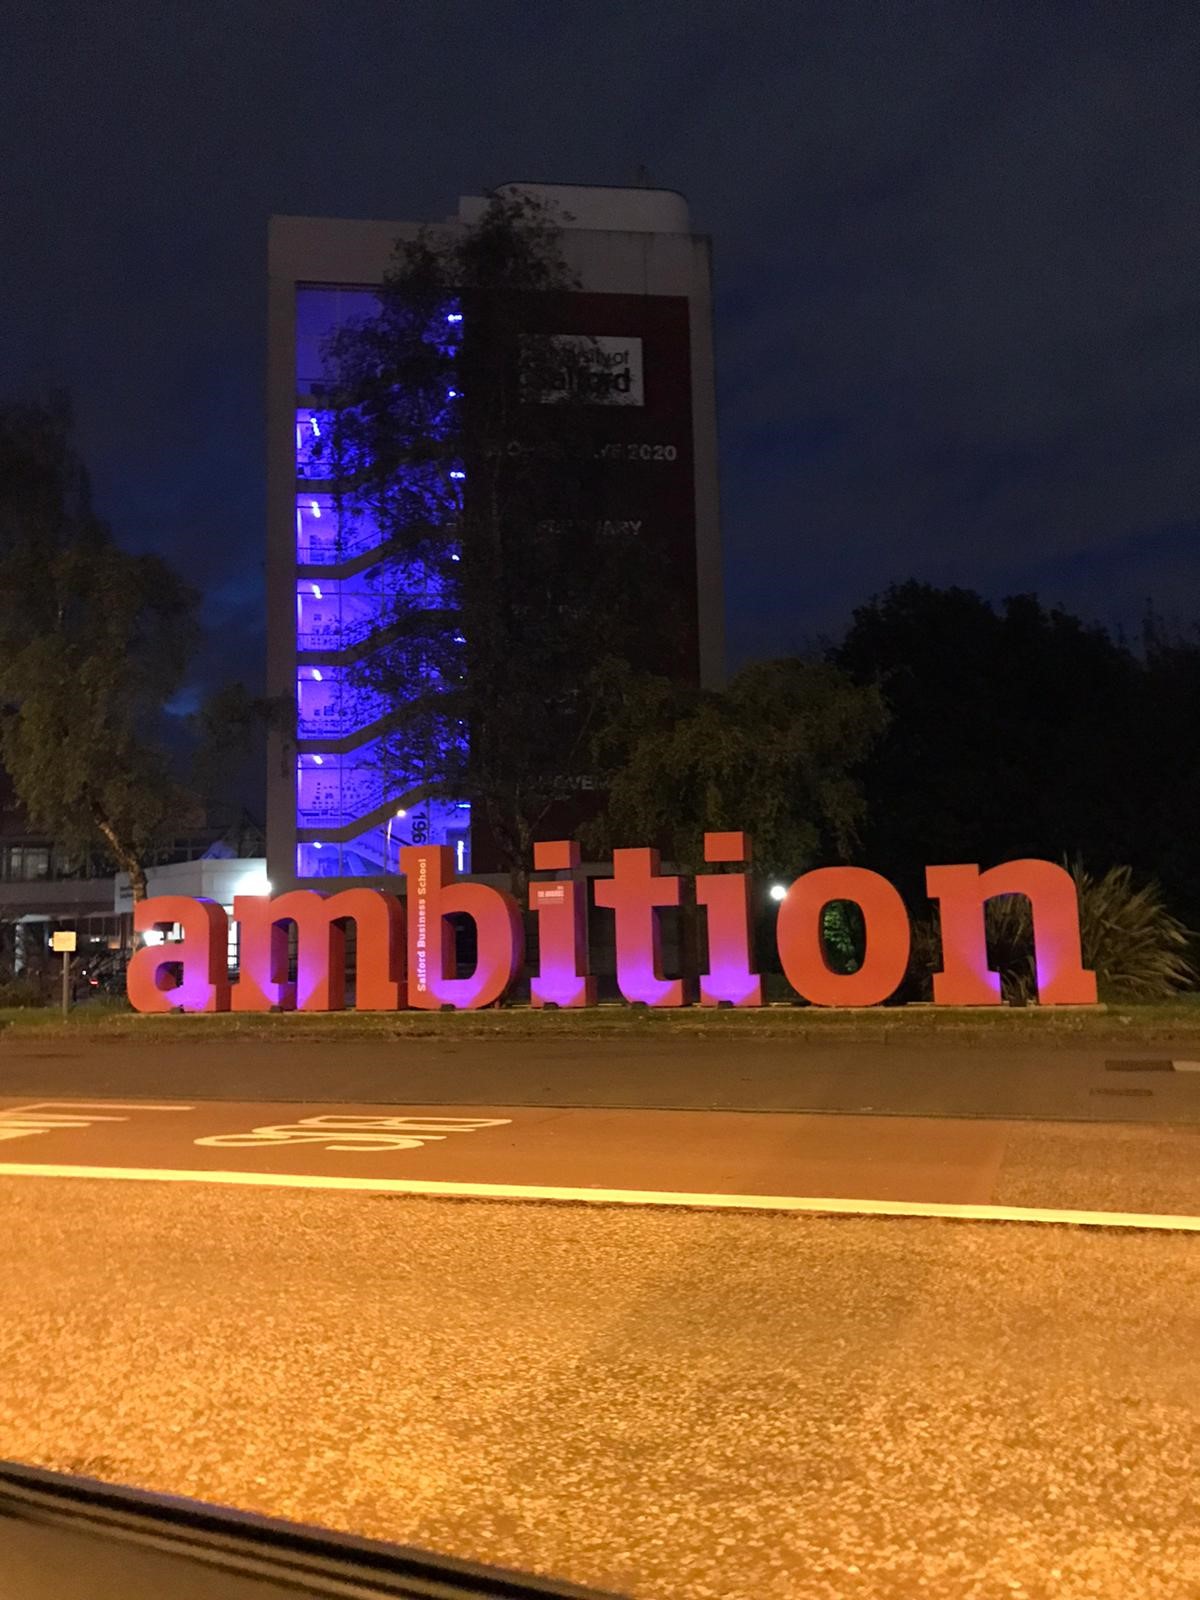 Maxwell Building at night with ambition sign